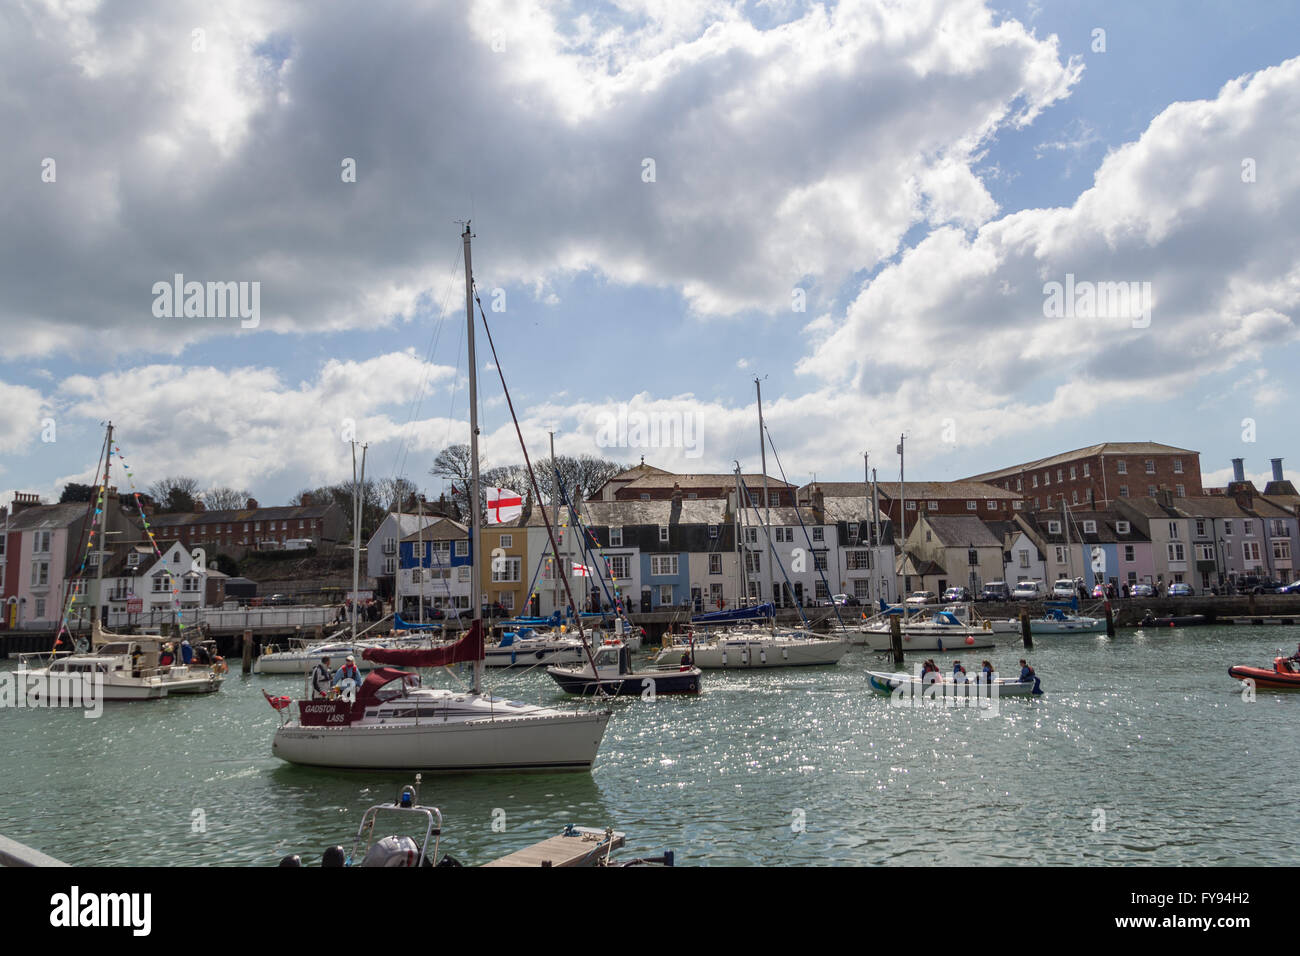 Weymouth, England. 23 April 2016. Queen's 90th Birthday Floating Tribute. Scene with many boat. Credit:  Frances Underwood/Alamy Live News Stock Photo